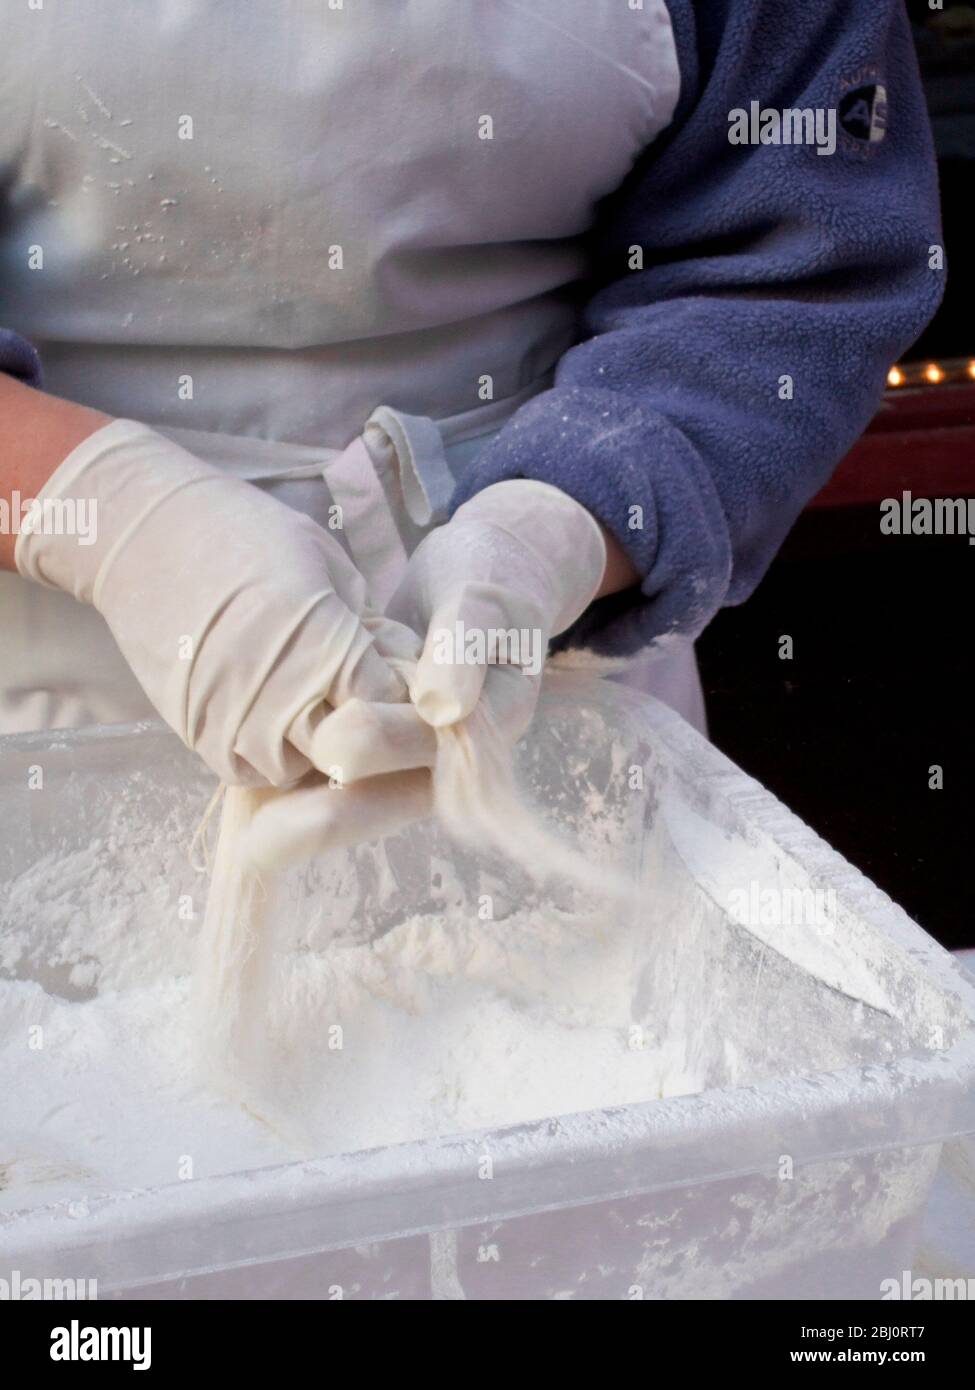 Dragon's Beard Candy being prepared in London's Chinatown for the Chinese New Year celebrations - Stock Photo